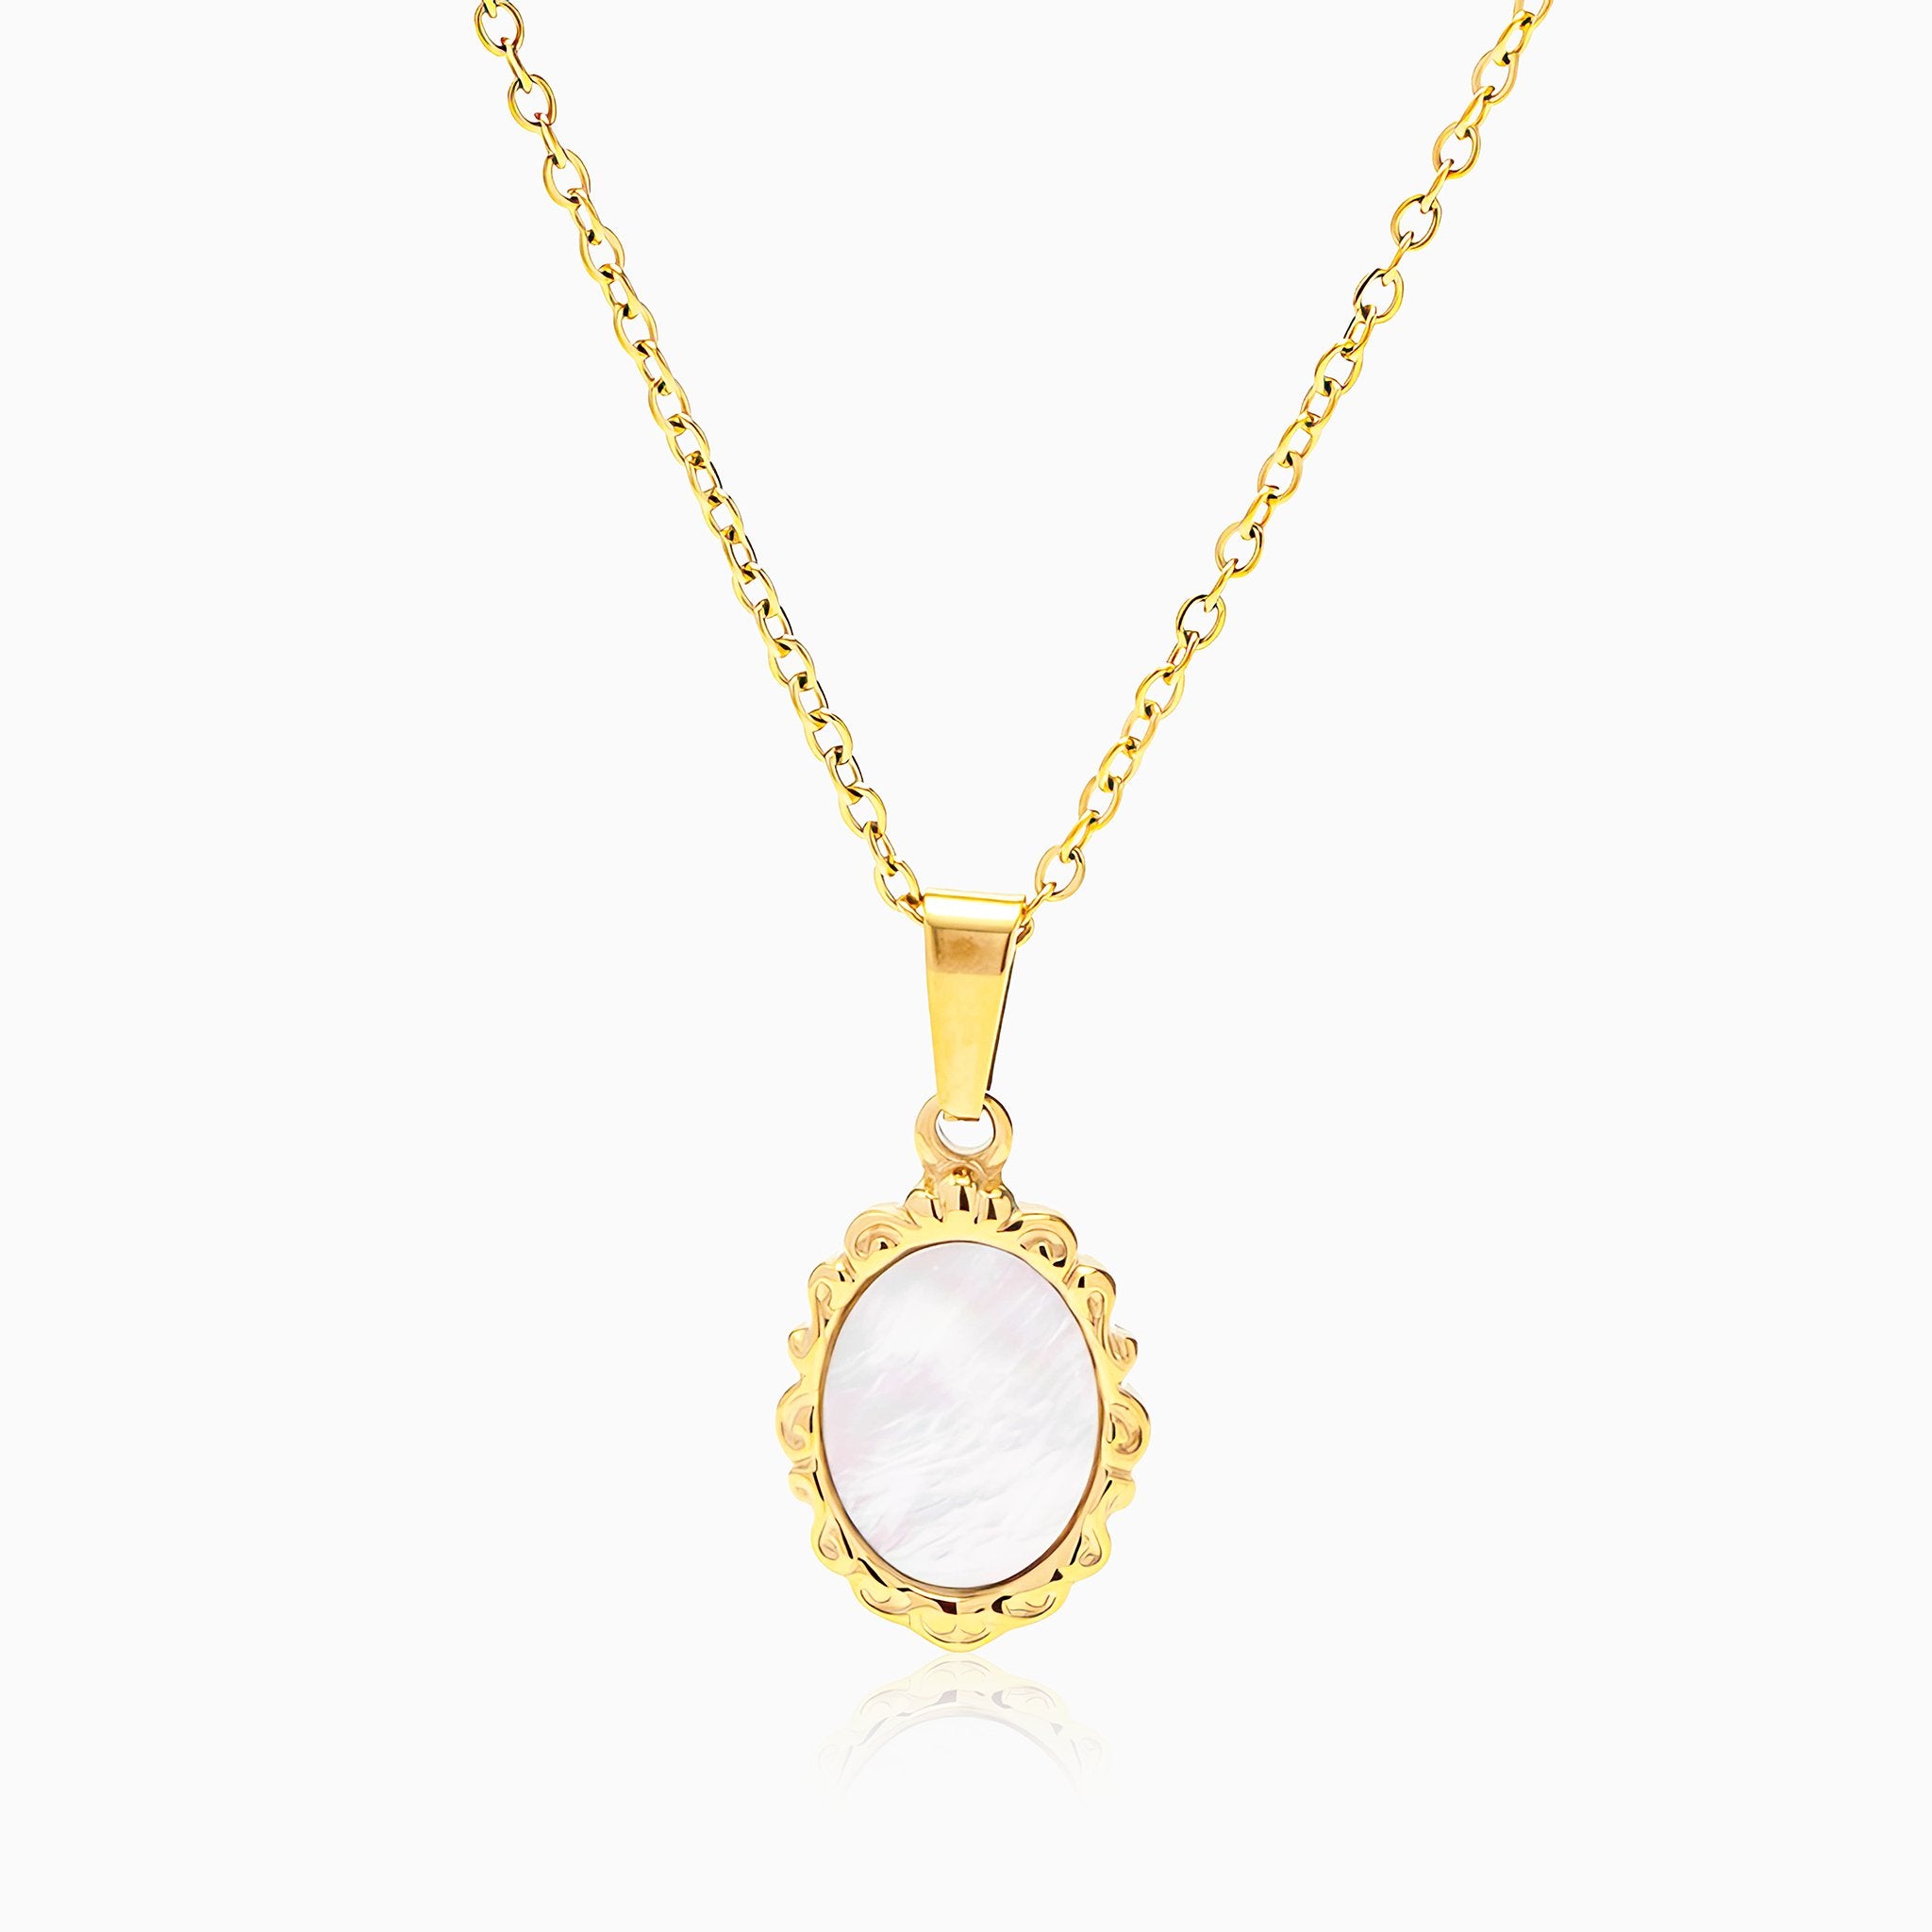 Classic White Gem Pendant Necklace - Nobbier - Necklace - 18K Gold And Titanium PVD Coated Jewelry